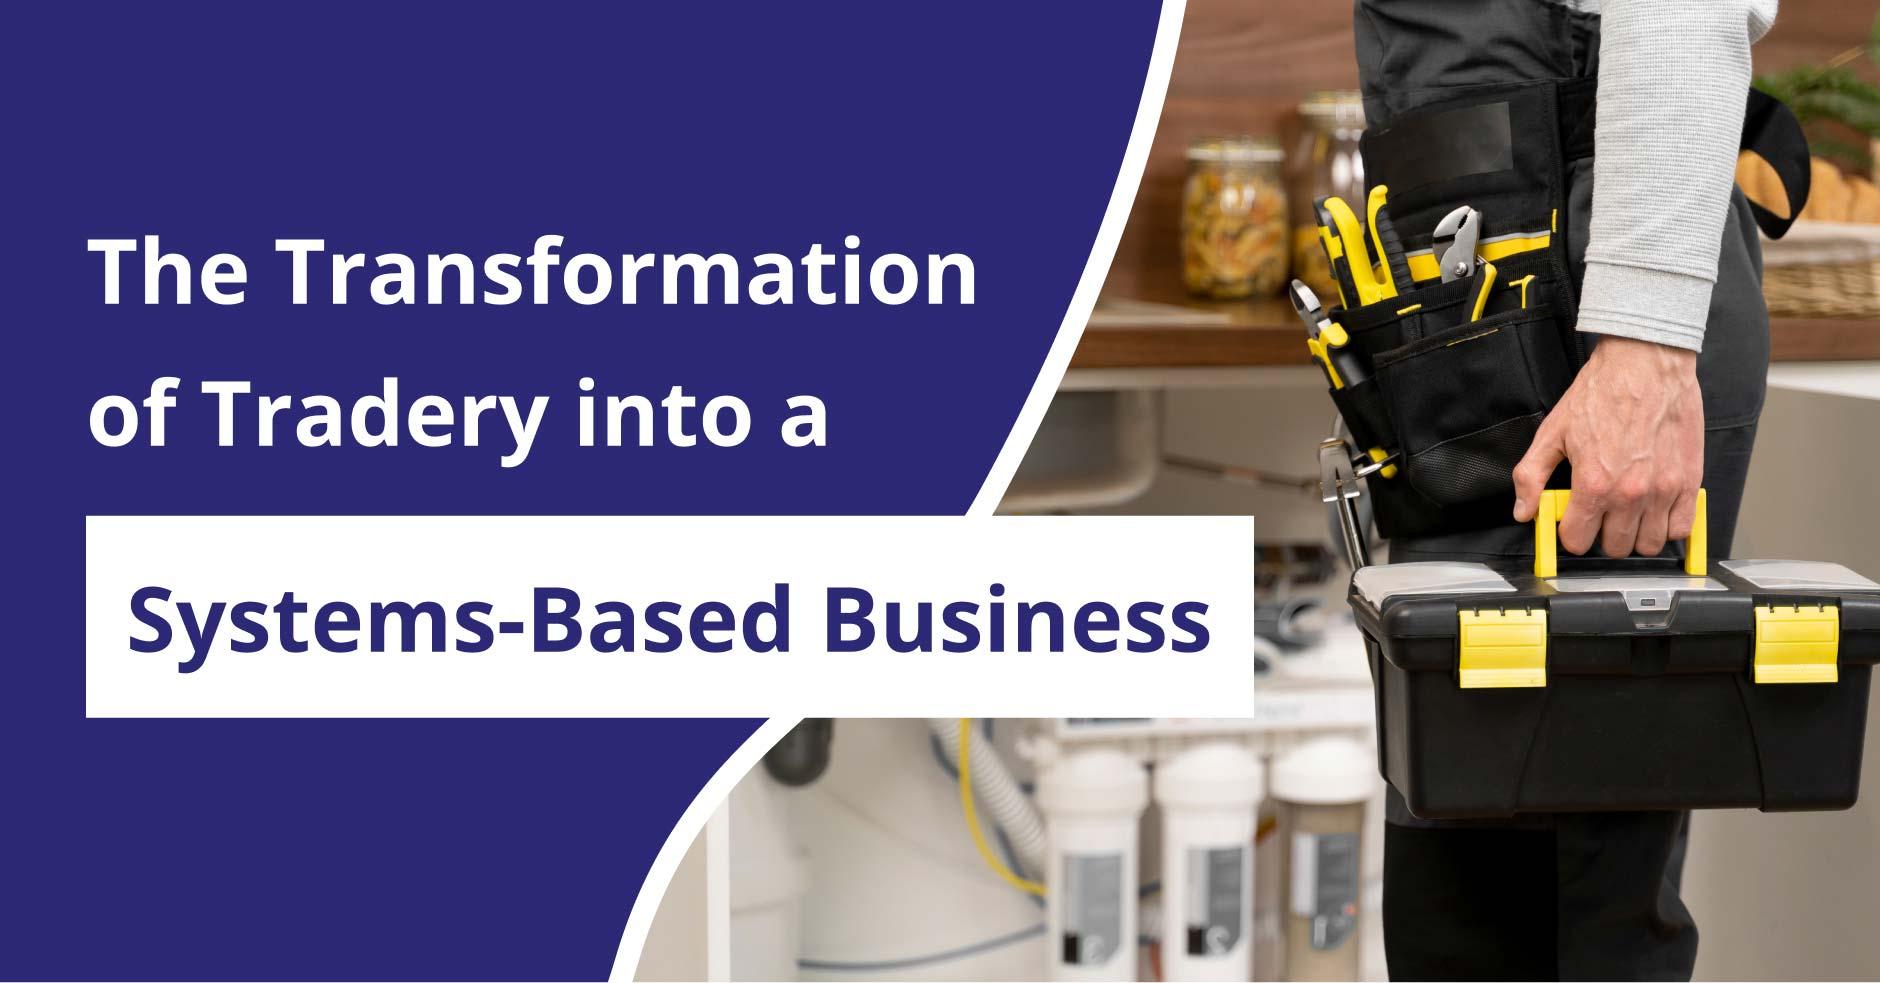 The Transformation of Tradery into a Systems-Based Business